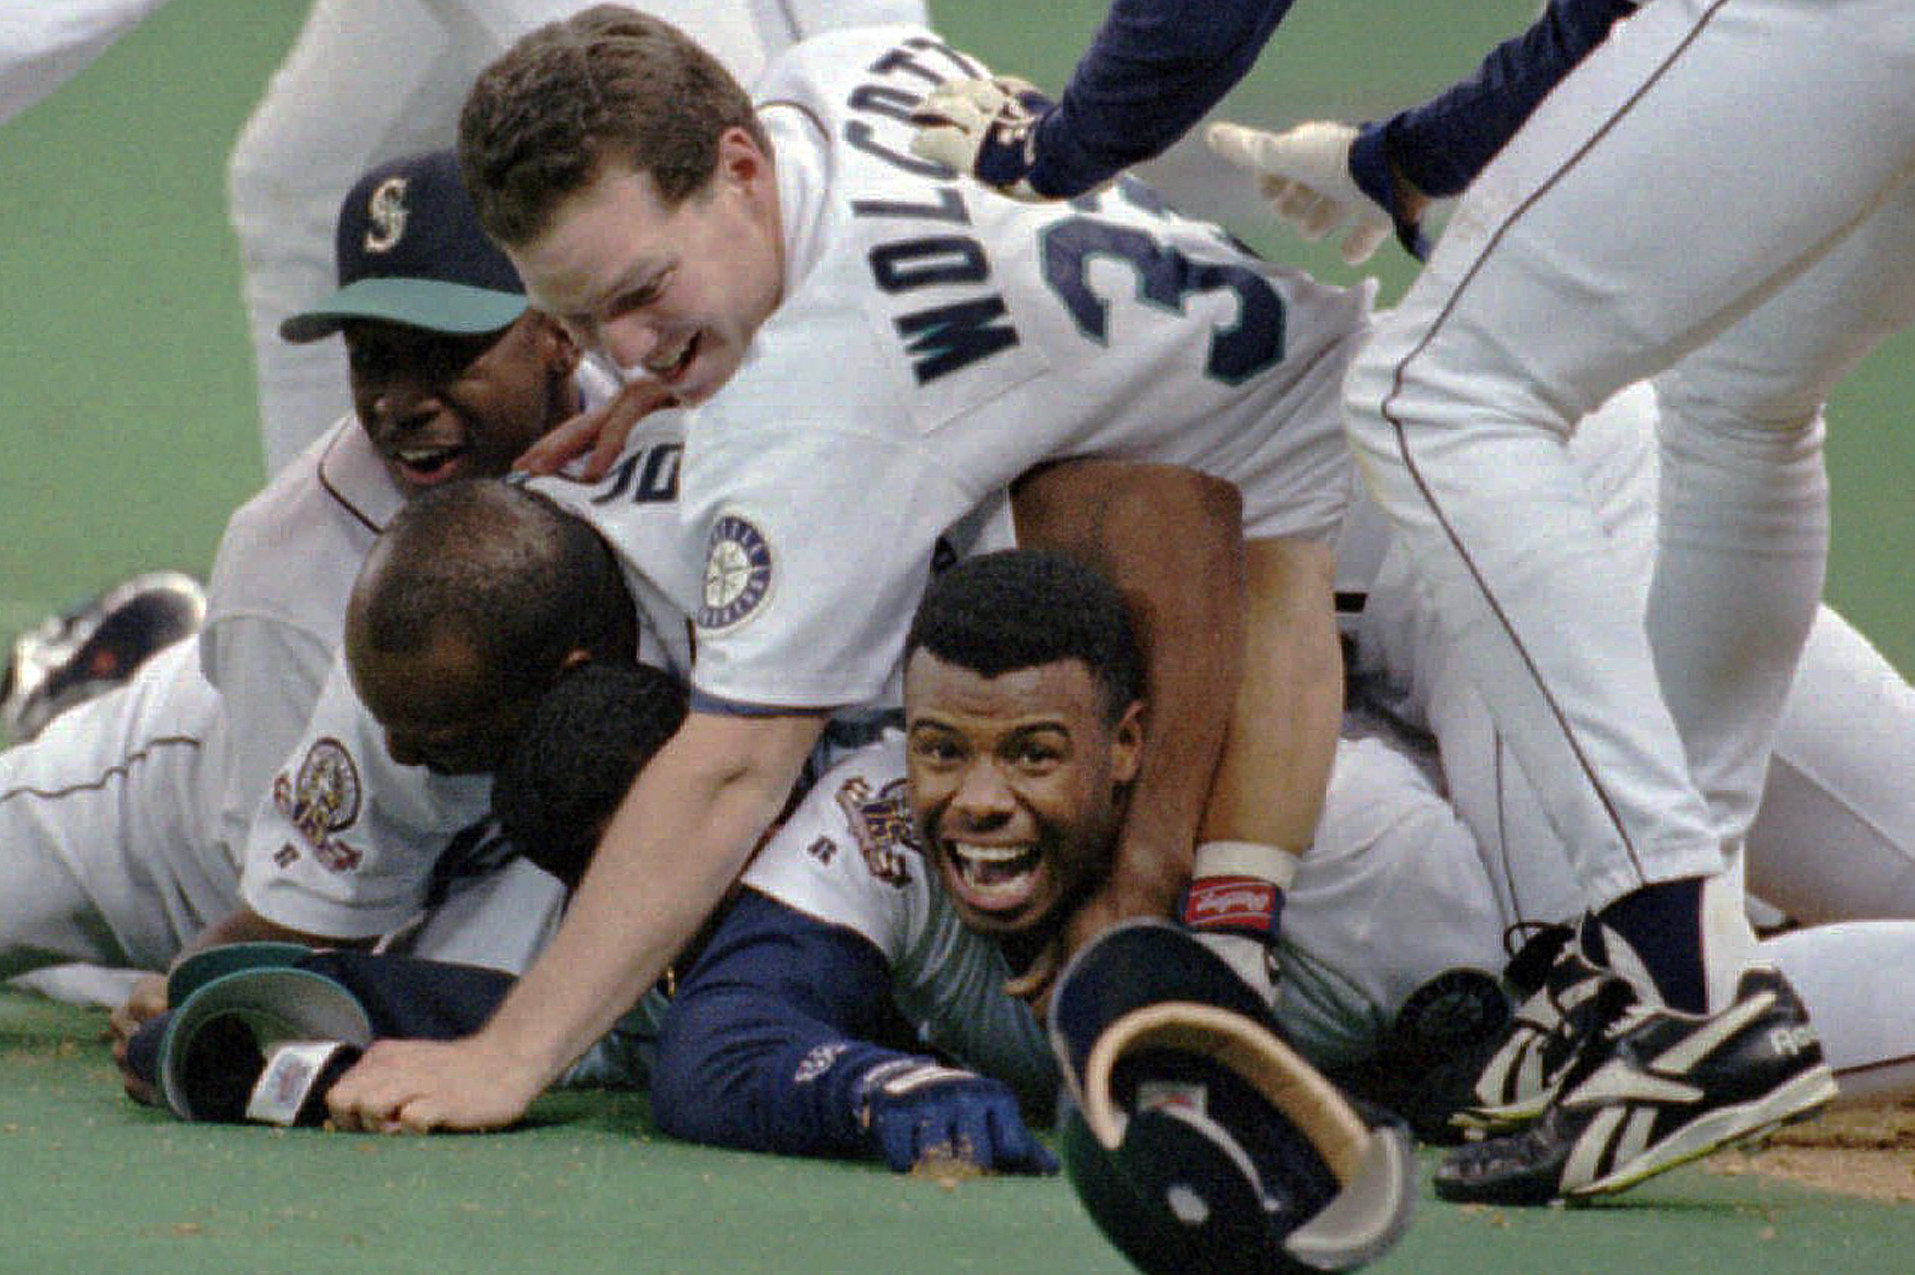 Seattle Mariners win the American League West pennant on October 2, 1995. 